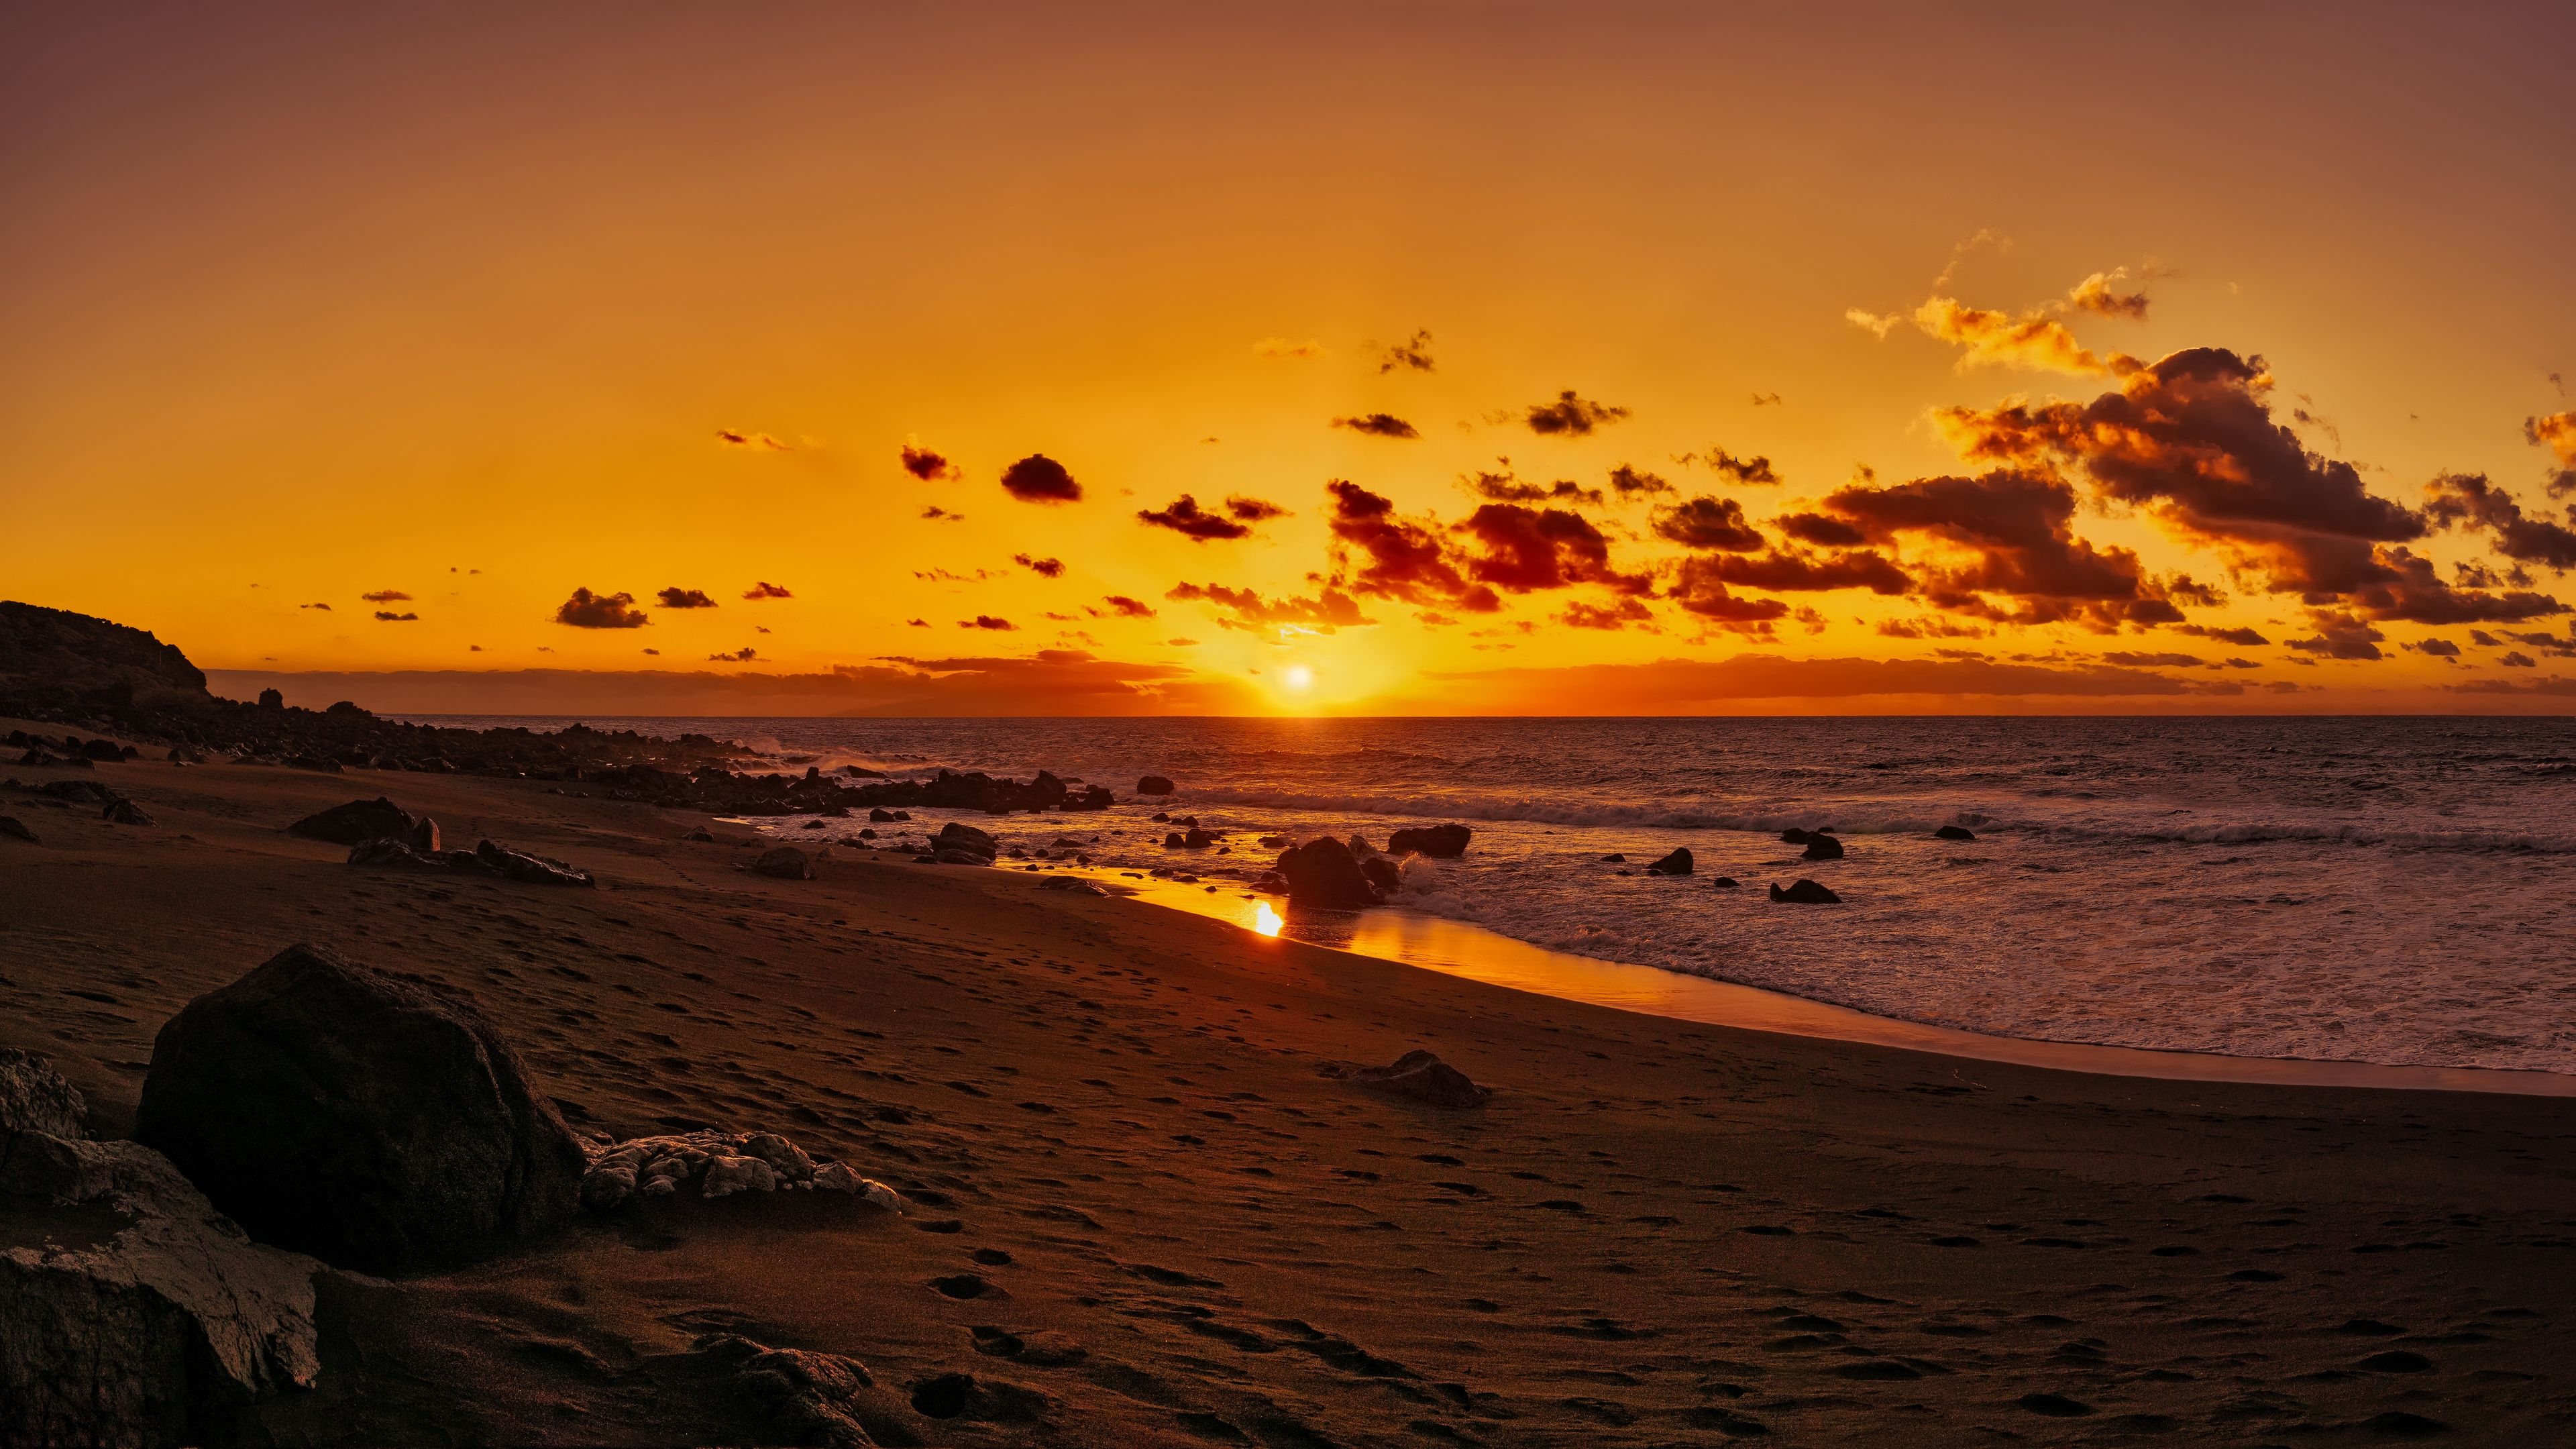 Canary Islands Wallpapers